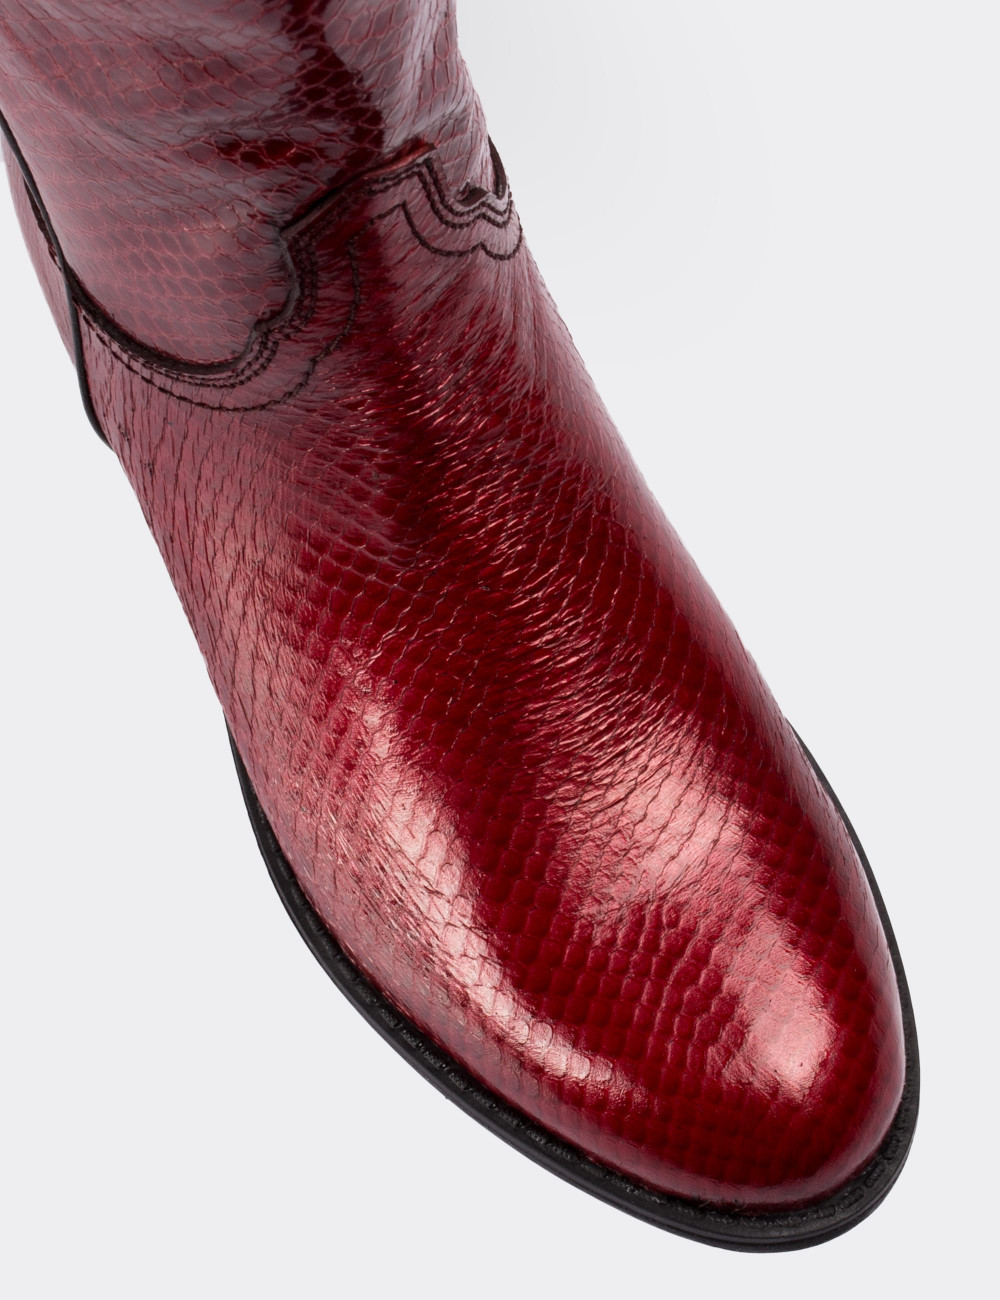 Burgundy Patent Leather Western Boots - 01308ZBRDC01